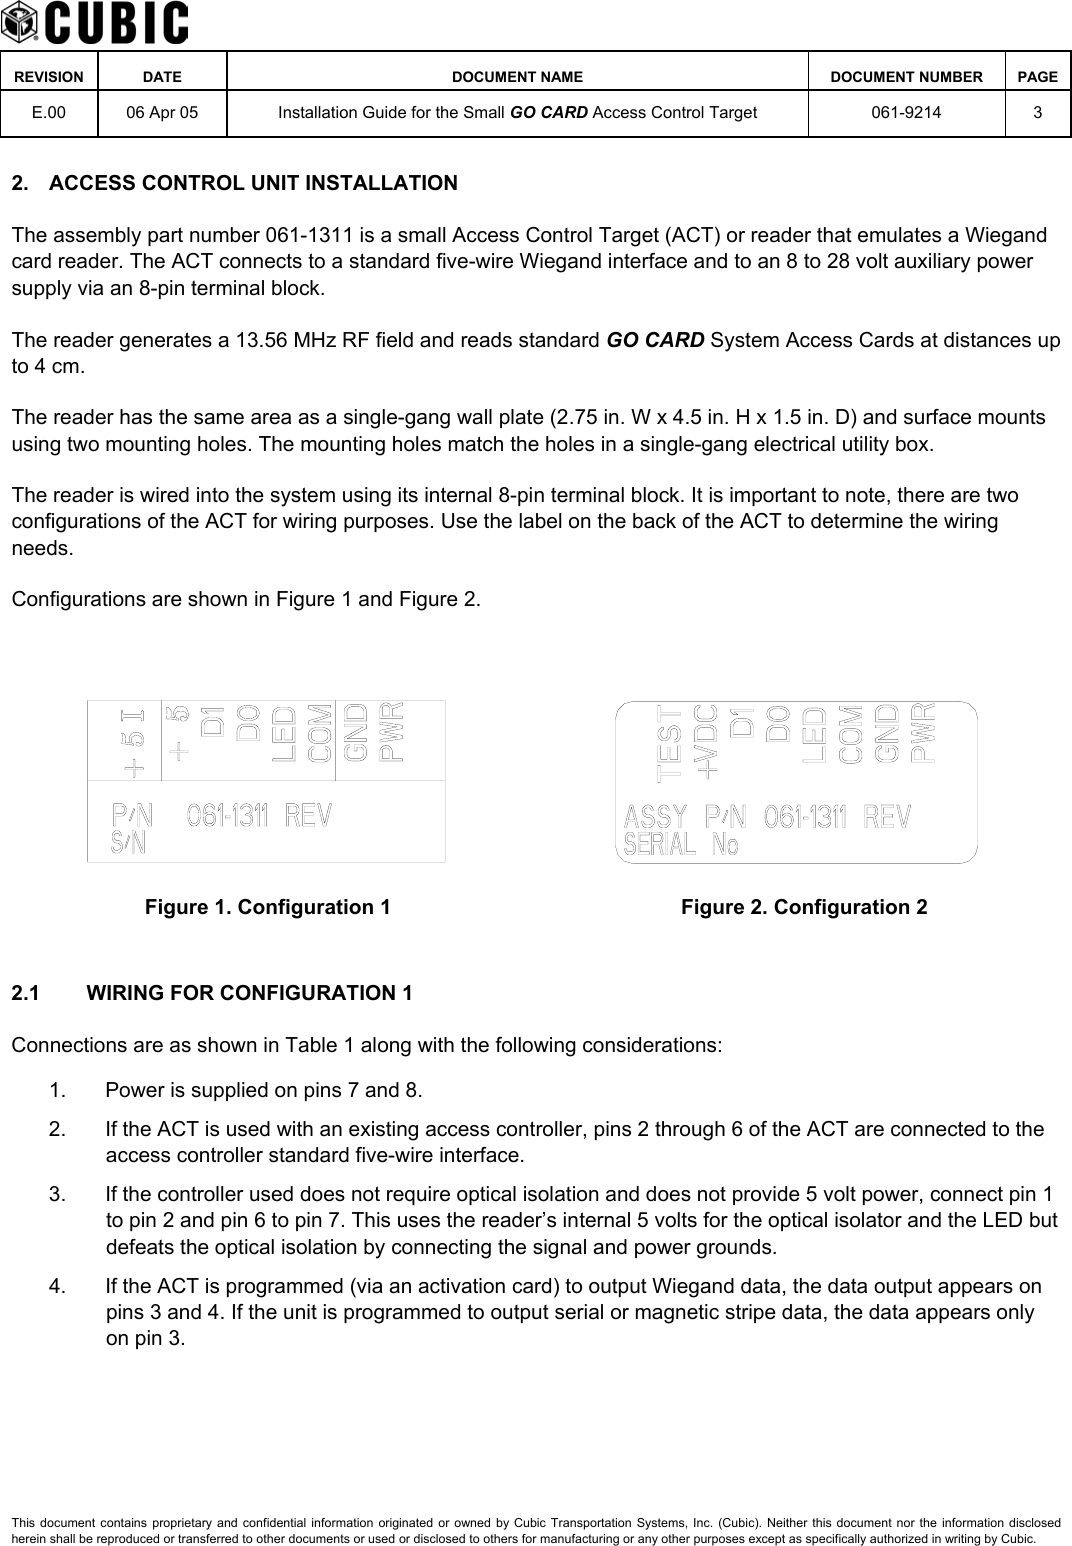    REVISION DATE  DOCUMENT NAME  DOCUMENT NUMBER  PAGE  E.00  06 Apr 05  Installation Guide for the Small GO CARD Access Control Target  061-9214 3  2.  ACCESS CONTROL UNIT INSTALLATION The assembly part number 061-1311 is a small Access Control Target (ACT) or reader that emulates a Wiegand card reader. The ACT connects to a standard five-wire Wiegand interface and to an 8 to 28 volt auxiliary power supply via an 8-pin terminal block. The reader generates a 13.56 MHz RF field and reads standard GO CARD System Access Cards at distances up to 4 cm. The reader has the same area as a single-gang wall plate (2.75 in. W x 4.5 in. H x 1.5 in. D) and surface mounts using two mounting holes. The mounting holes match the holes in a single-gang electrical utility box. The reader is wired into the system using its internal 8-pin terminal block. It is important to note, there are two configurations of the ACT for wiring purposes. Use the label on the back of the ACT to determine the wiring needs. Configurations are shown in Figure 1 and Figure 2.    Figure 1. Configuration 1  Figure 2. Configuration 2  2.1  WIRING FOR CONFIGURATION 1 Connections are as shown in Table 1 along with the following considerations: 1.  Power is supplied on pins 7 and 8. 2.  If the ACT is used with an existing access controller, pins 2 through 6 of the ACT are connected to the access controller standard five-wire interface. 3.  If the controller used does not require optical isolation and does not provide 5 volt power, connect pin 1 to pin 2 and pin 6 to pin 7. This uses the reader’s internal 5 volts for the optical isolator and the LED but defeats the optical isolation by connecting the signal and power grounds. 4.  If the ACT is programmed (via an activation card) to output Wiegand data, the data output appears on pins 3 and 4. If the unit is programmed to output serial or magnetic stripe data, the data appears only on pin 3. This document contains proprietary and confidential information originated or owned by Cubic Transportation Systems, Inc. (Cubic). Neither this document nor the information disclosed herein shall be reproduced or transferred to other documents or used or disclosed to others for manufacturing or any other purposes except as specifically authorized in writing by Cubic. 